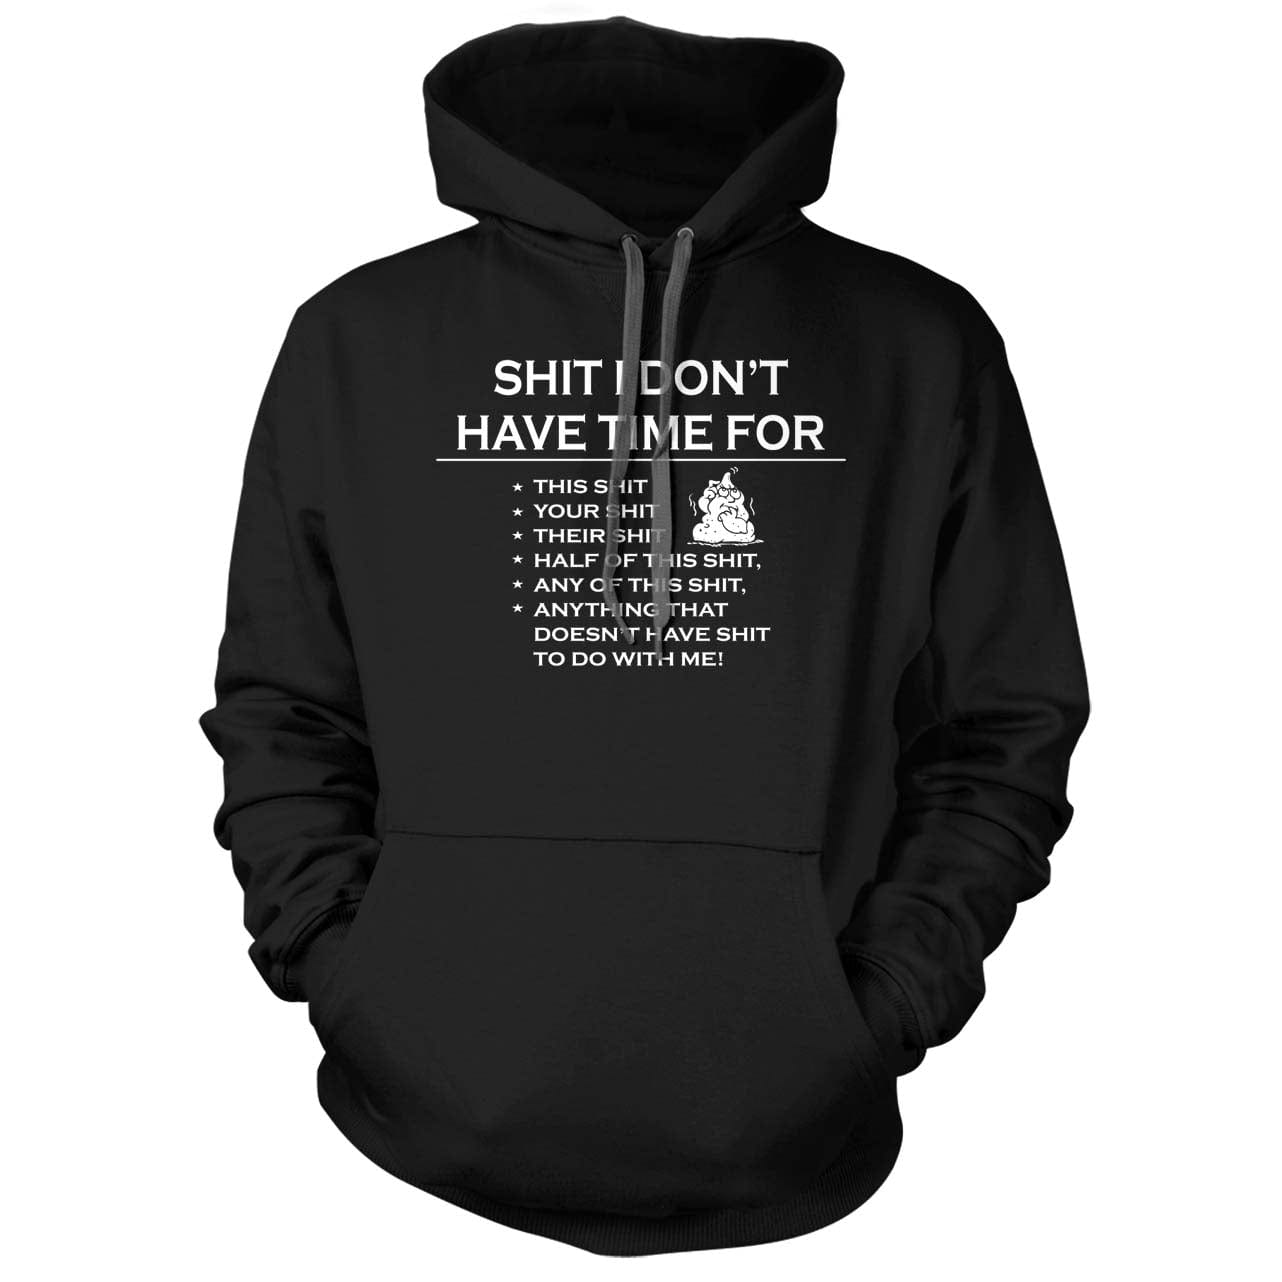 Sh!t I don't have time for Hoodie